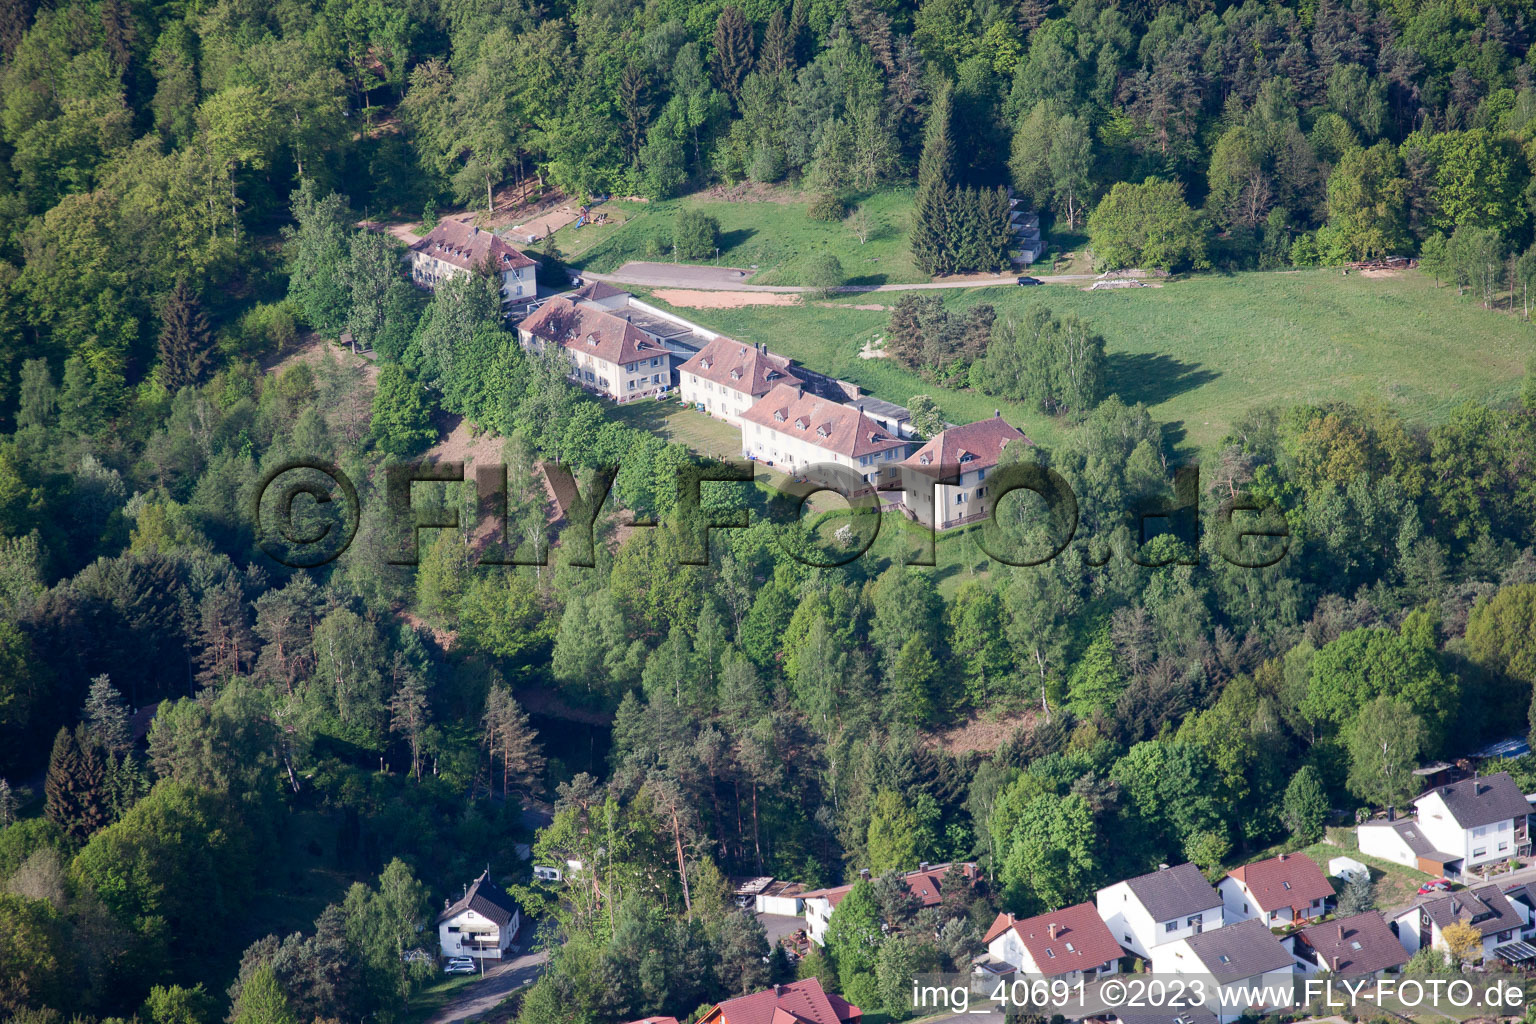 Aerial photograpy of Altschloßstraße 2-8 in Eppenbrunn in the state Rhineland-Palatinate, Germany